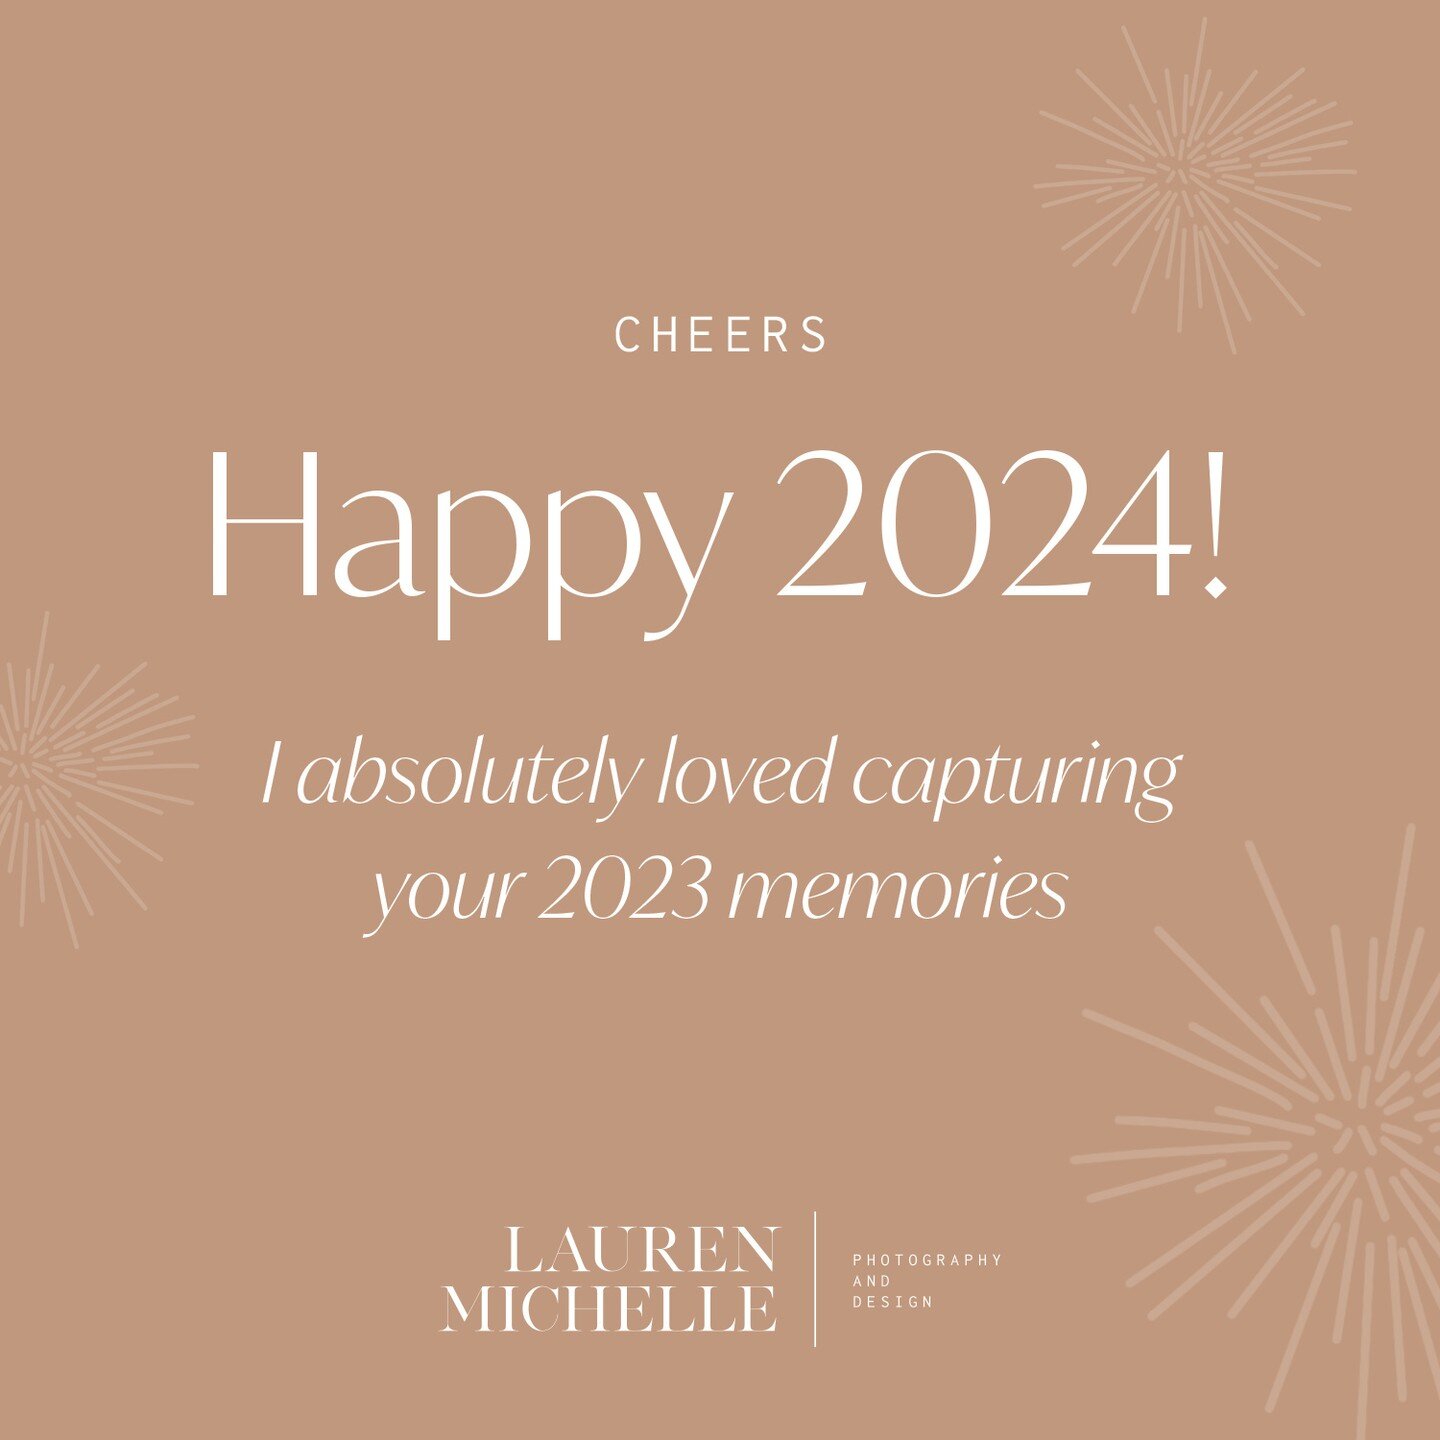 Thank you to each of my 2023 families.

Your love for each other and your moments together is the best art there is.

Cheers to many fun projects coming in 2024!